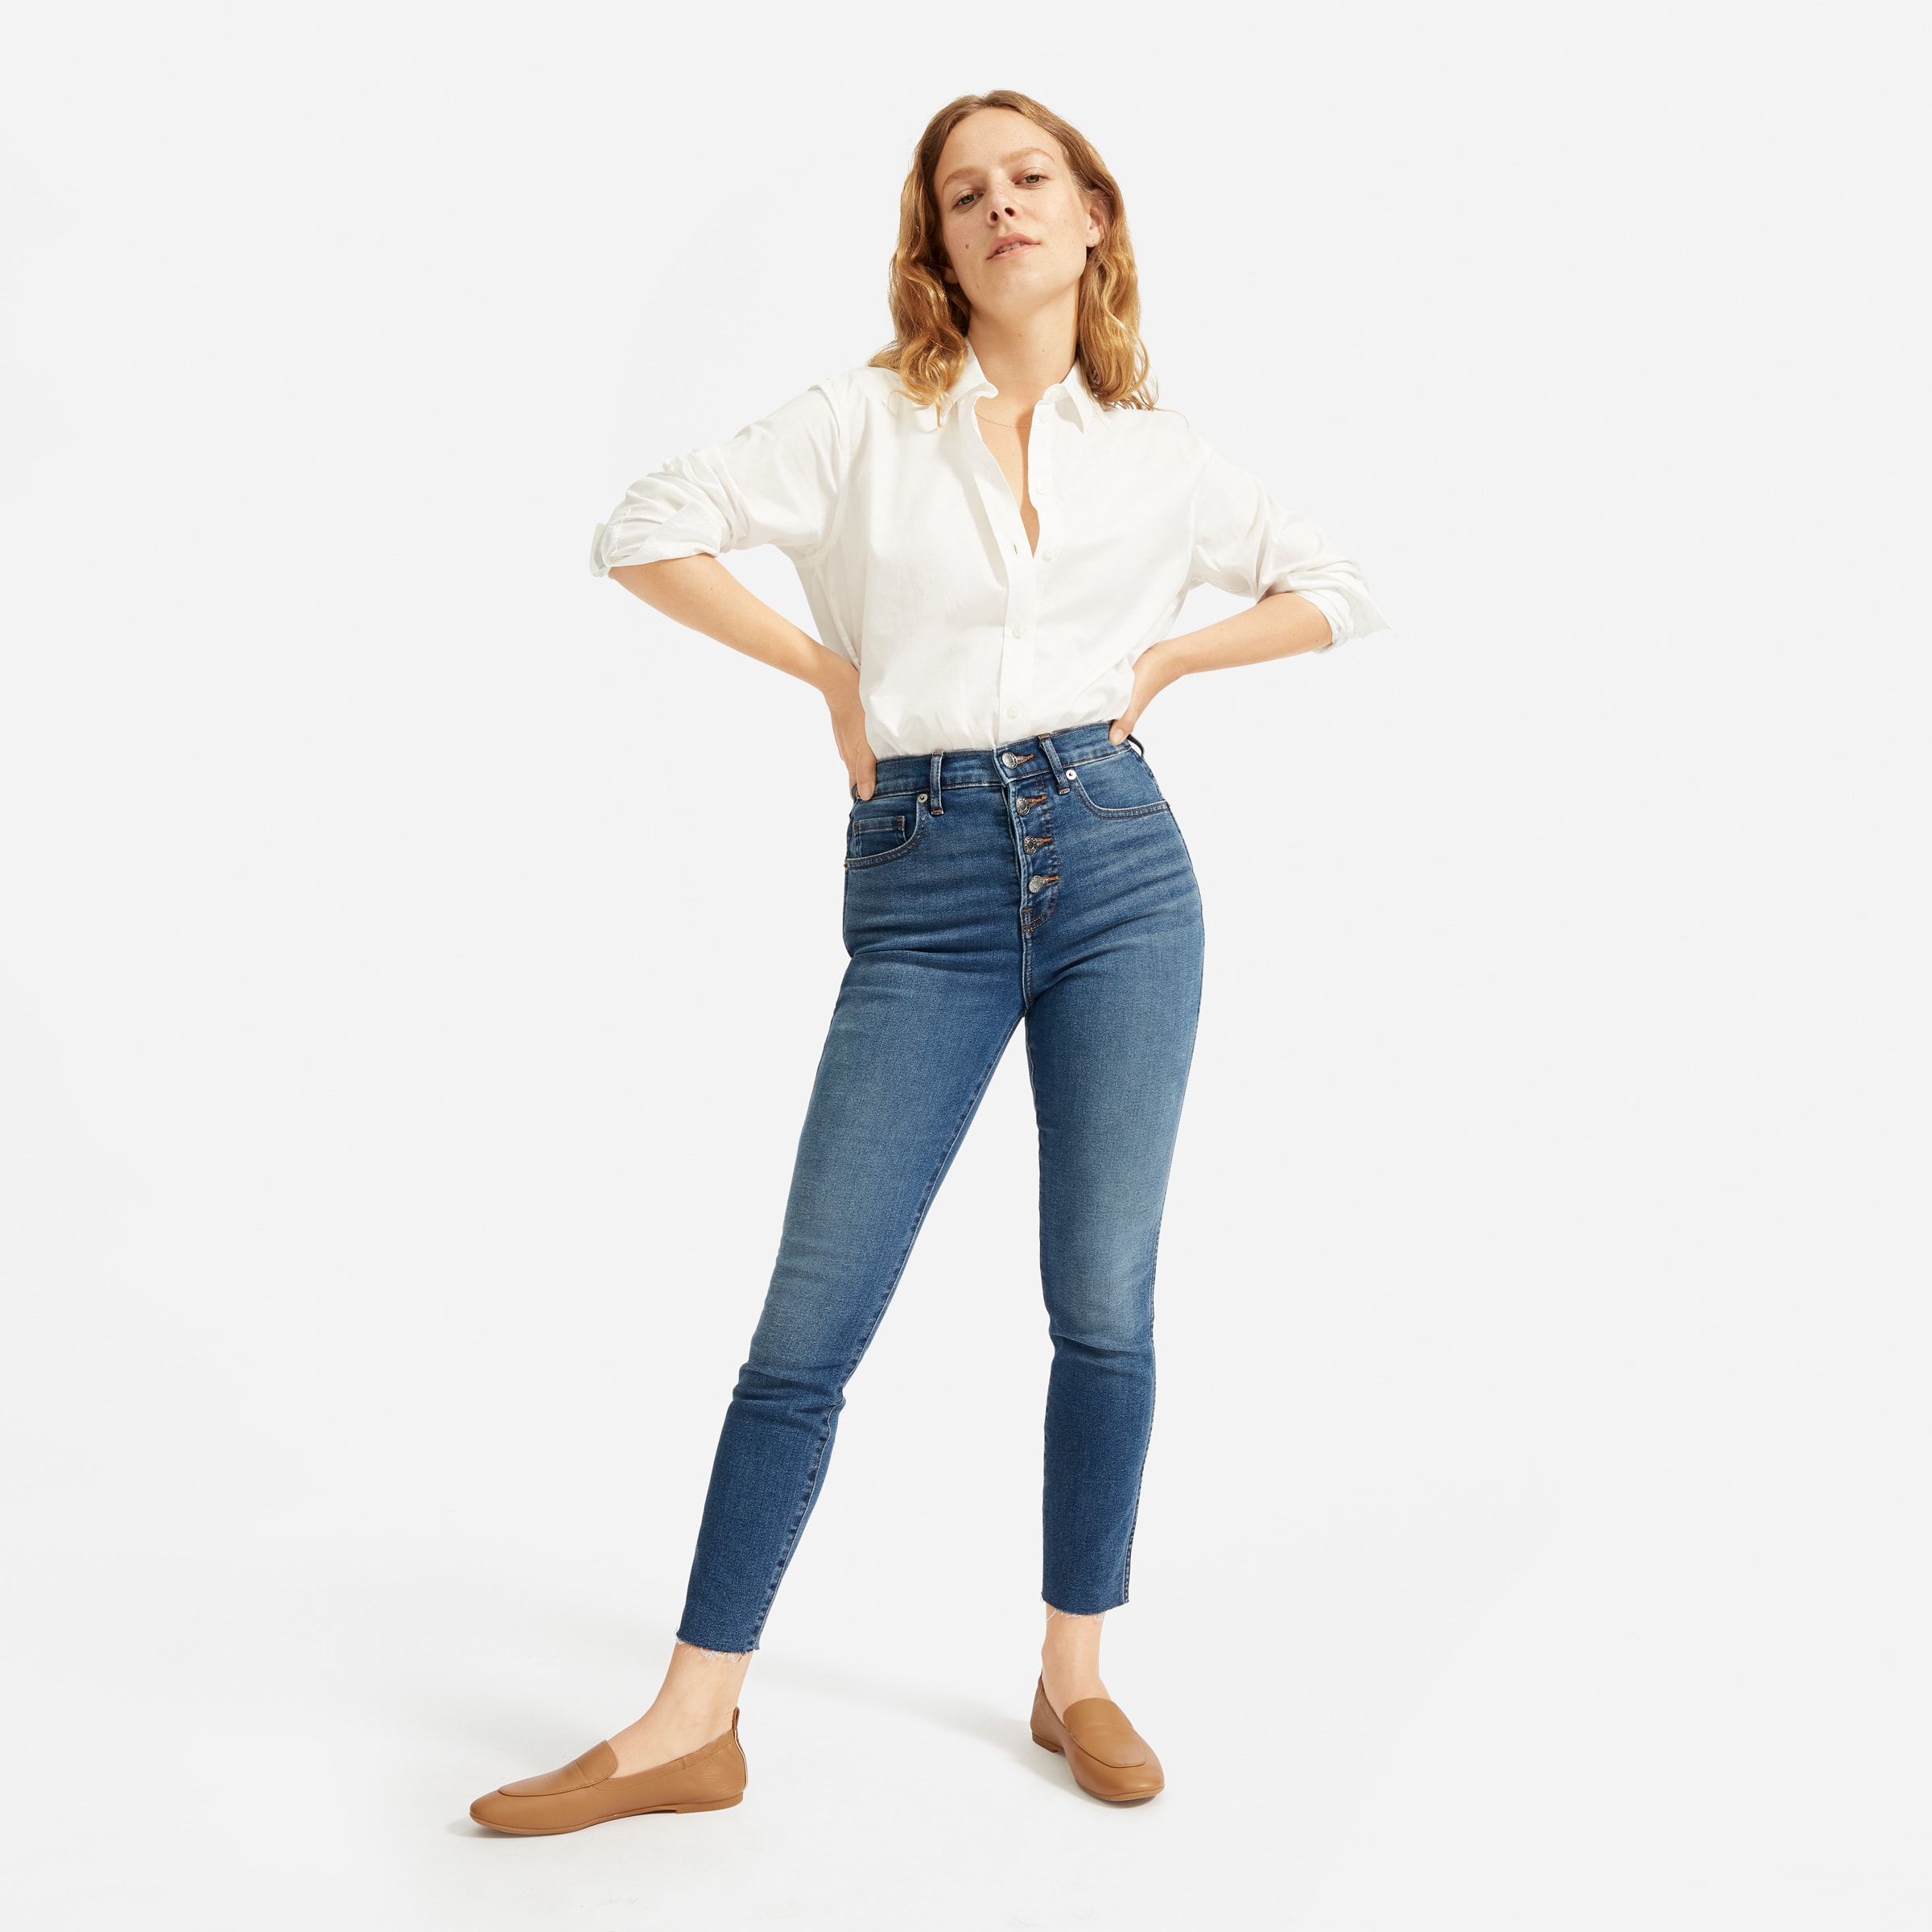 edgely™ Super Skinny High Rise Button Fly Jean